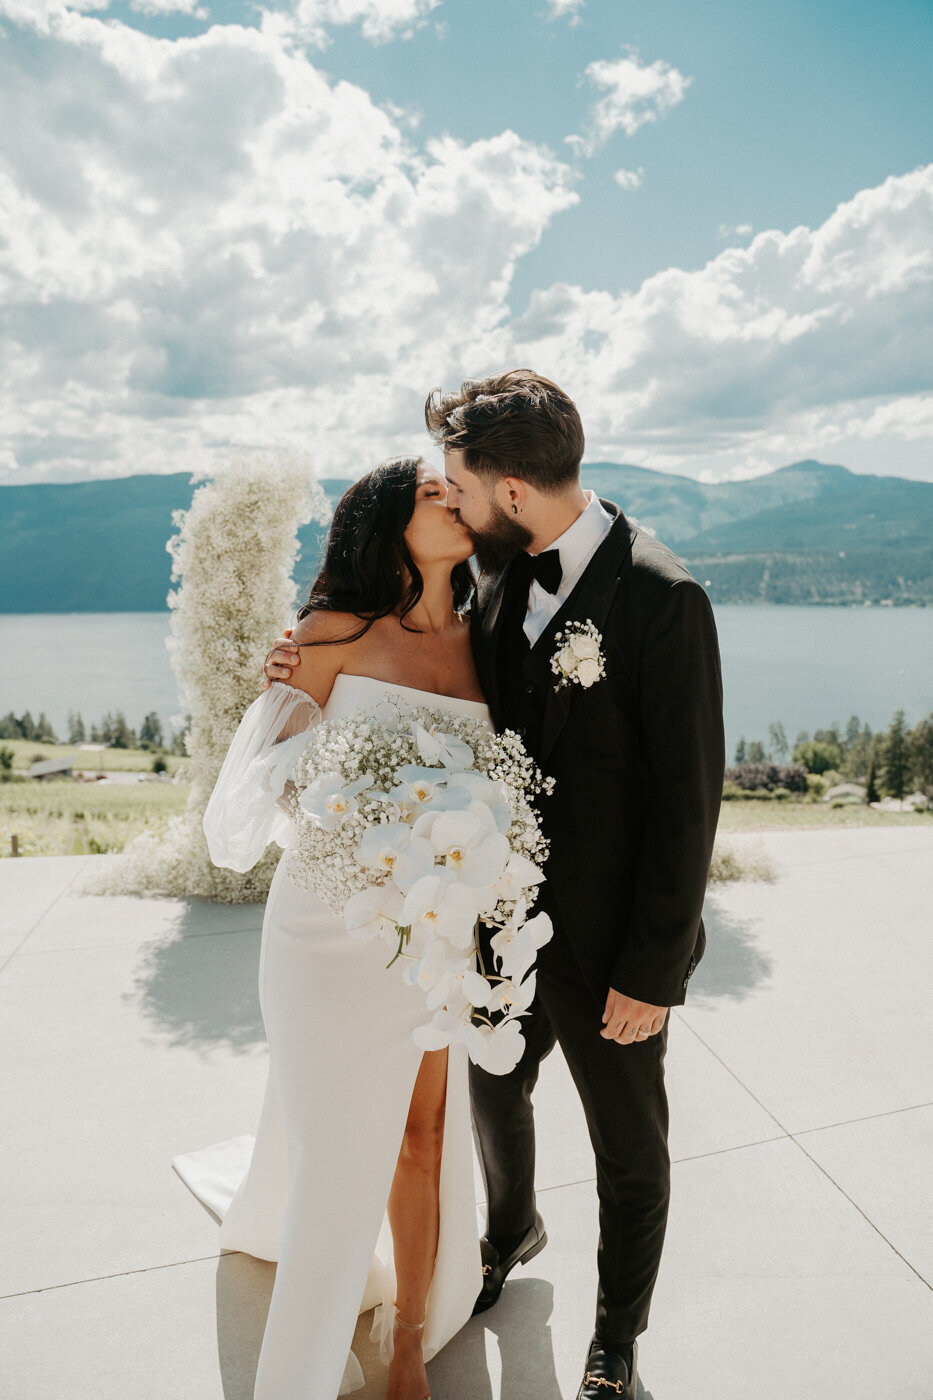 Kelowna Wedding Couple over looking the Okanagan Lake in Lake Country BC.  They are wearing modern sleek wedding attire with a gorgeous wedding dress and black tux.  A huge floral arch behind them filled with babysbreath.  A modern wedding day with a gorgeous look out!